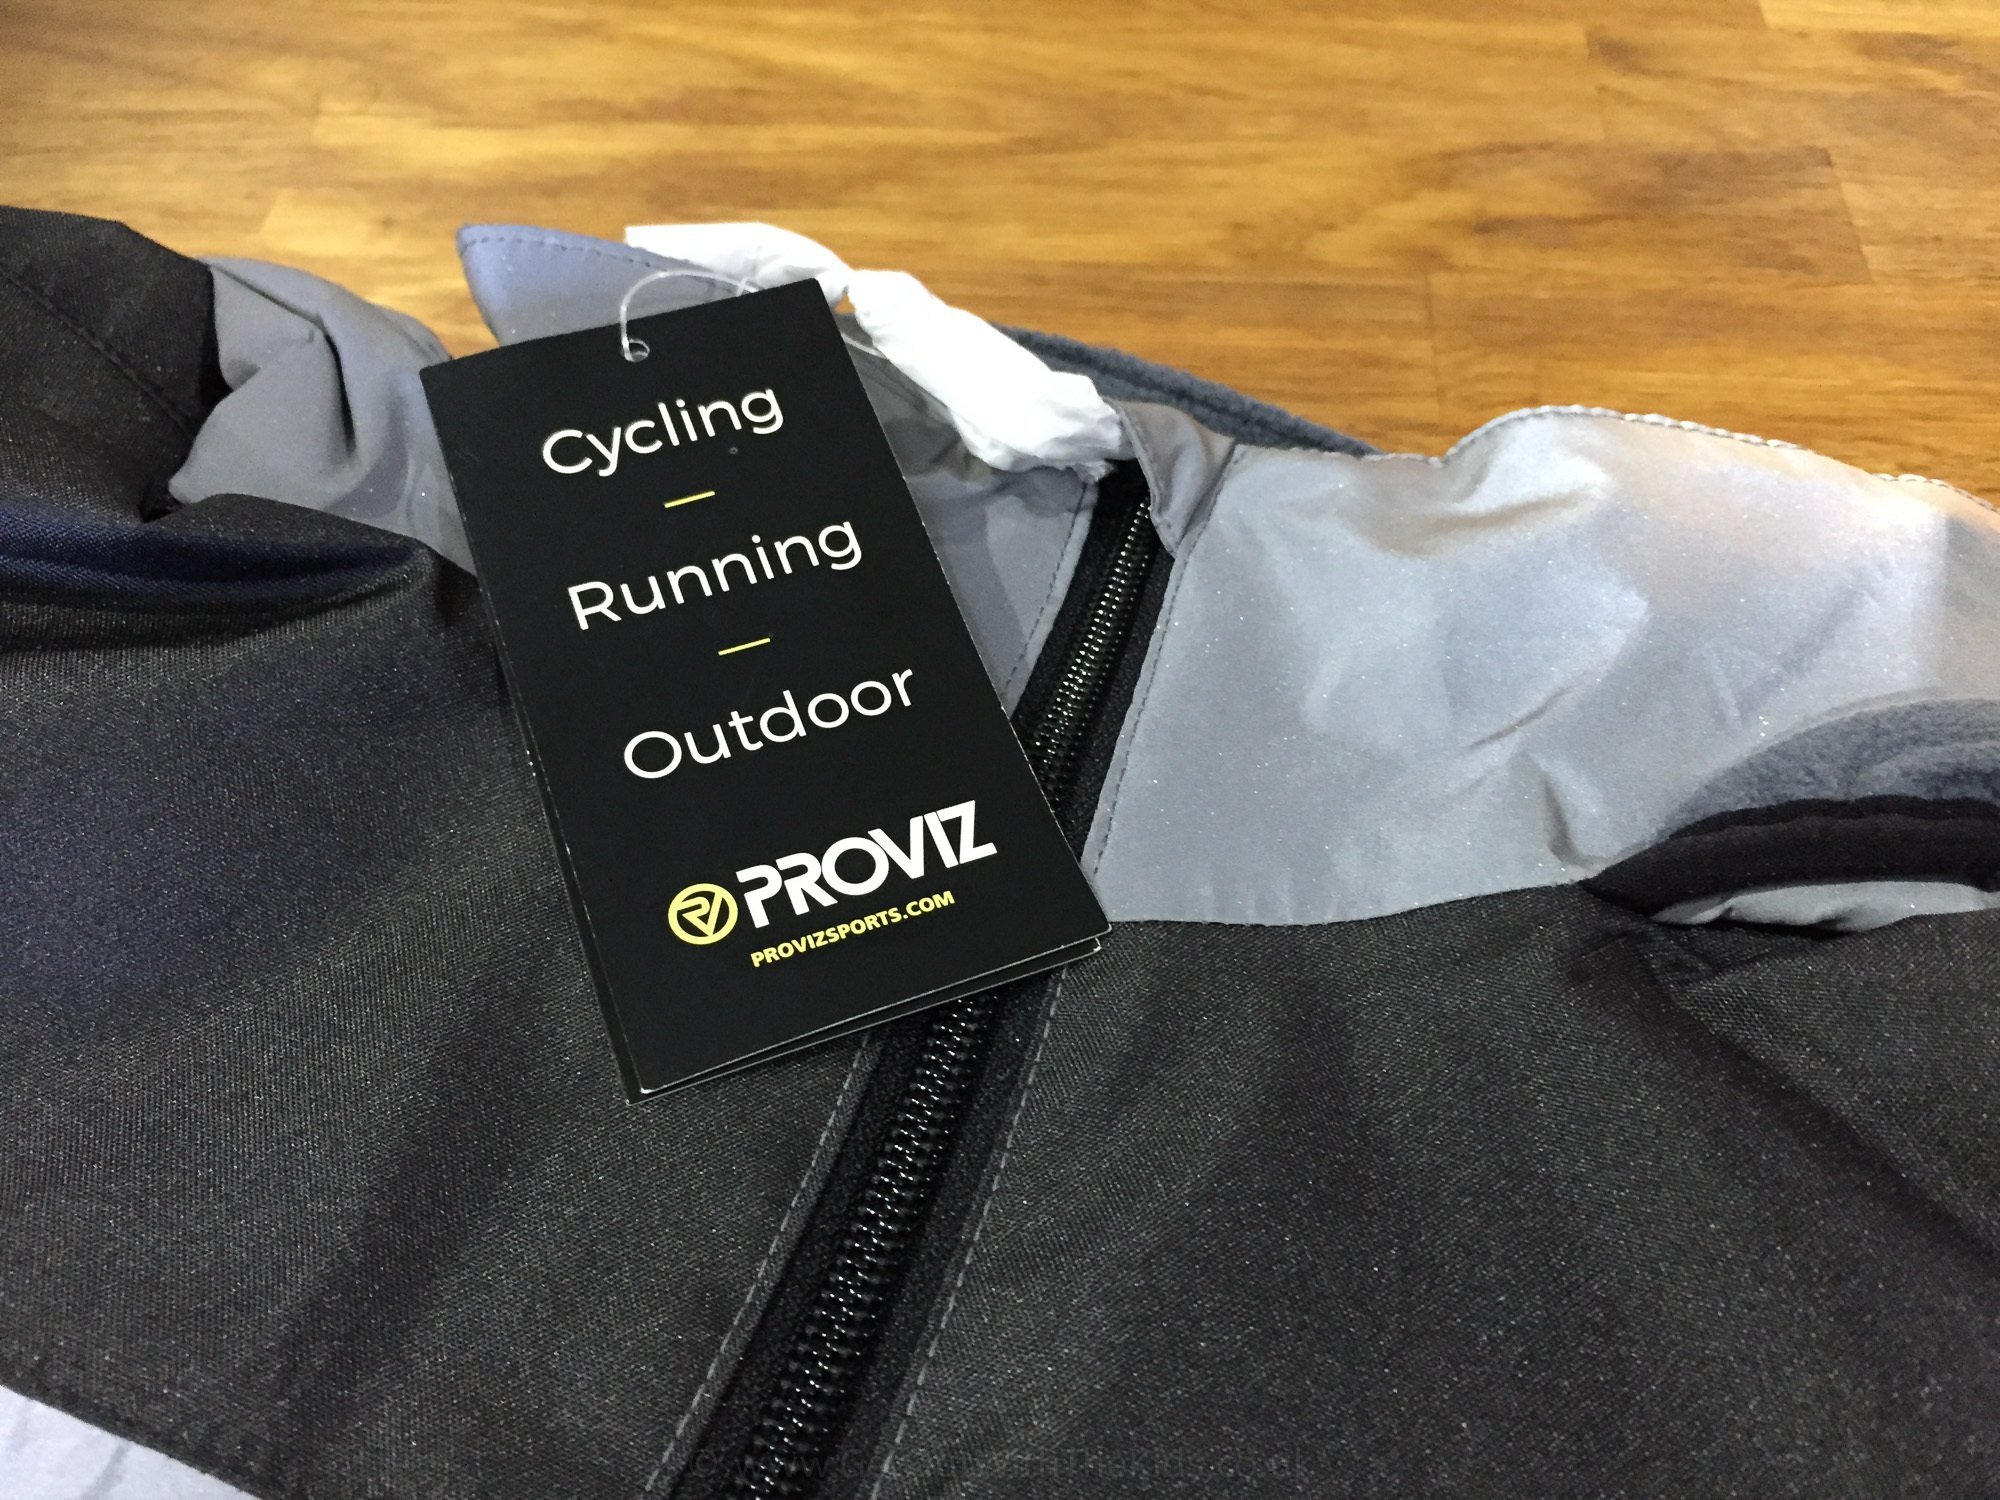 Label for the REFLECT360 jacket